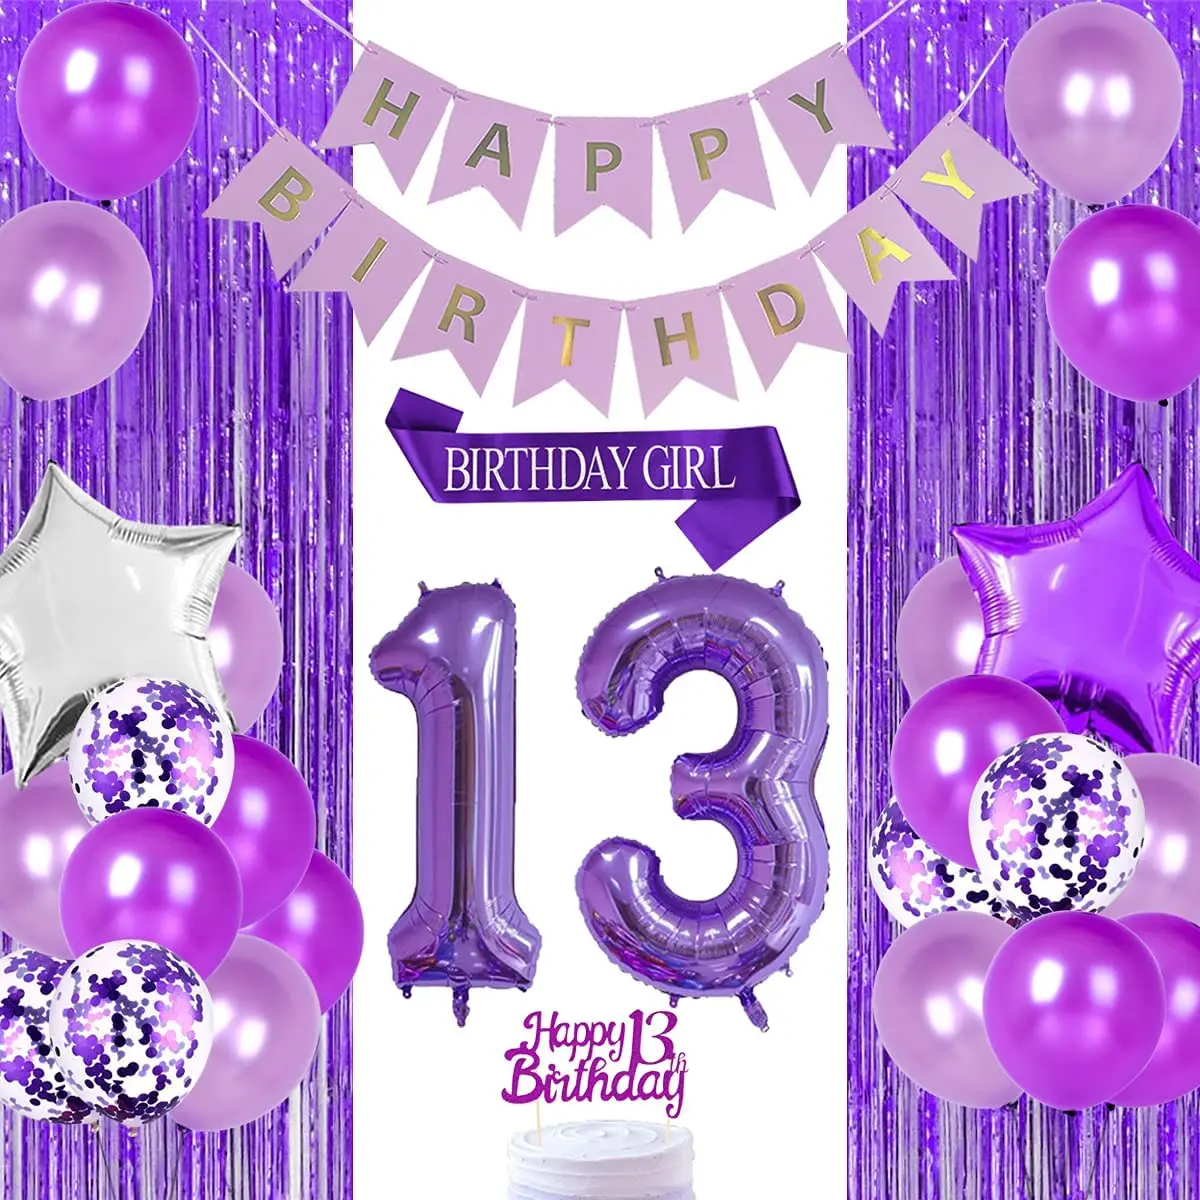 Purple and glitter silver Happy birthday banner first birthday decorations